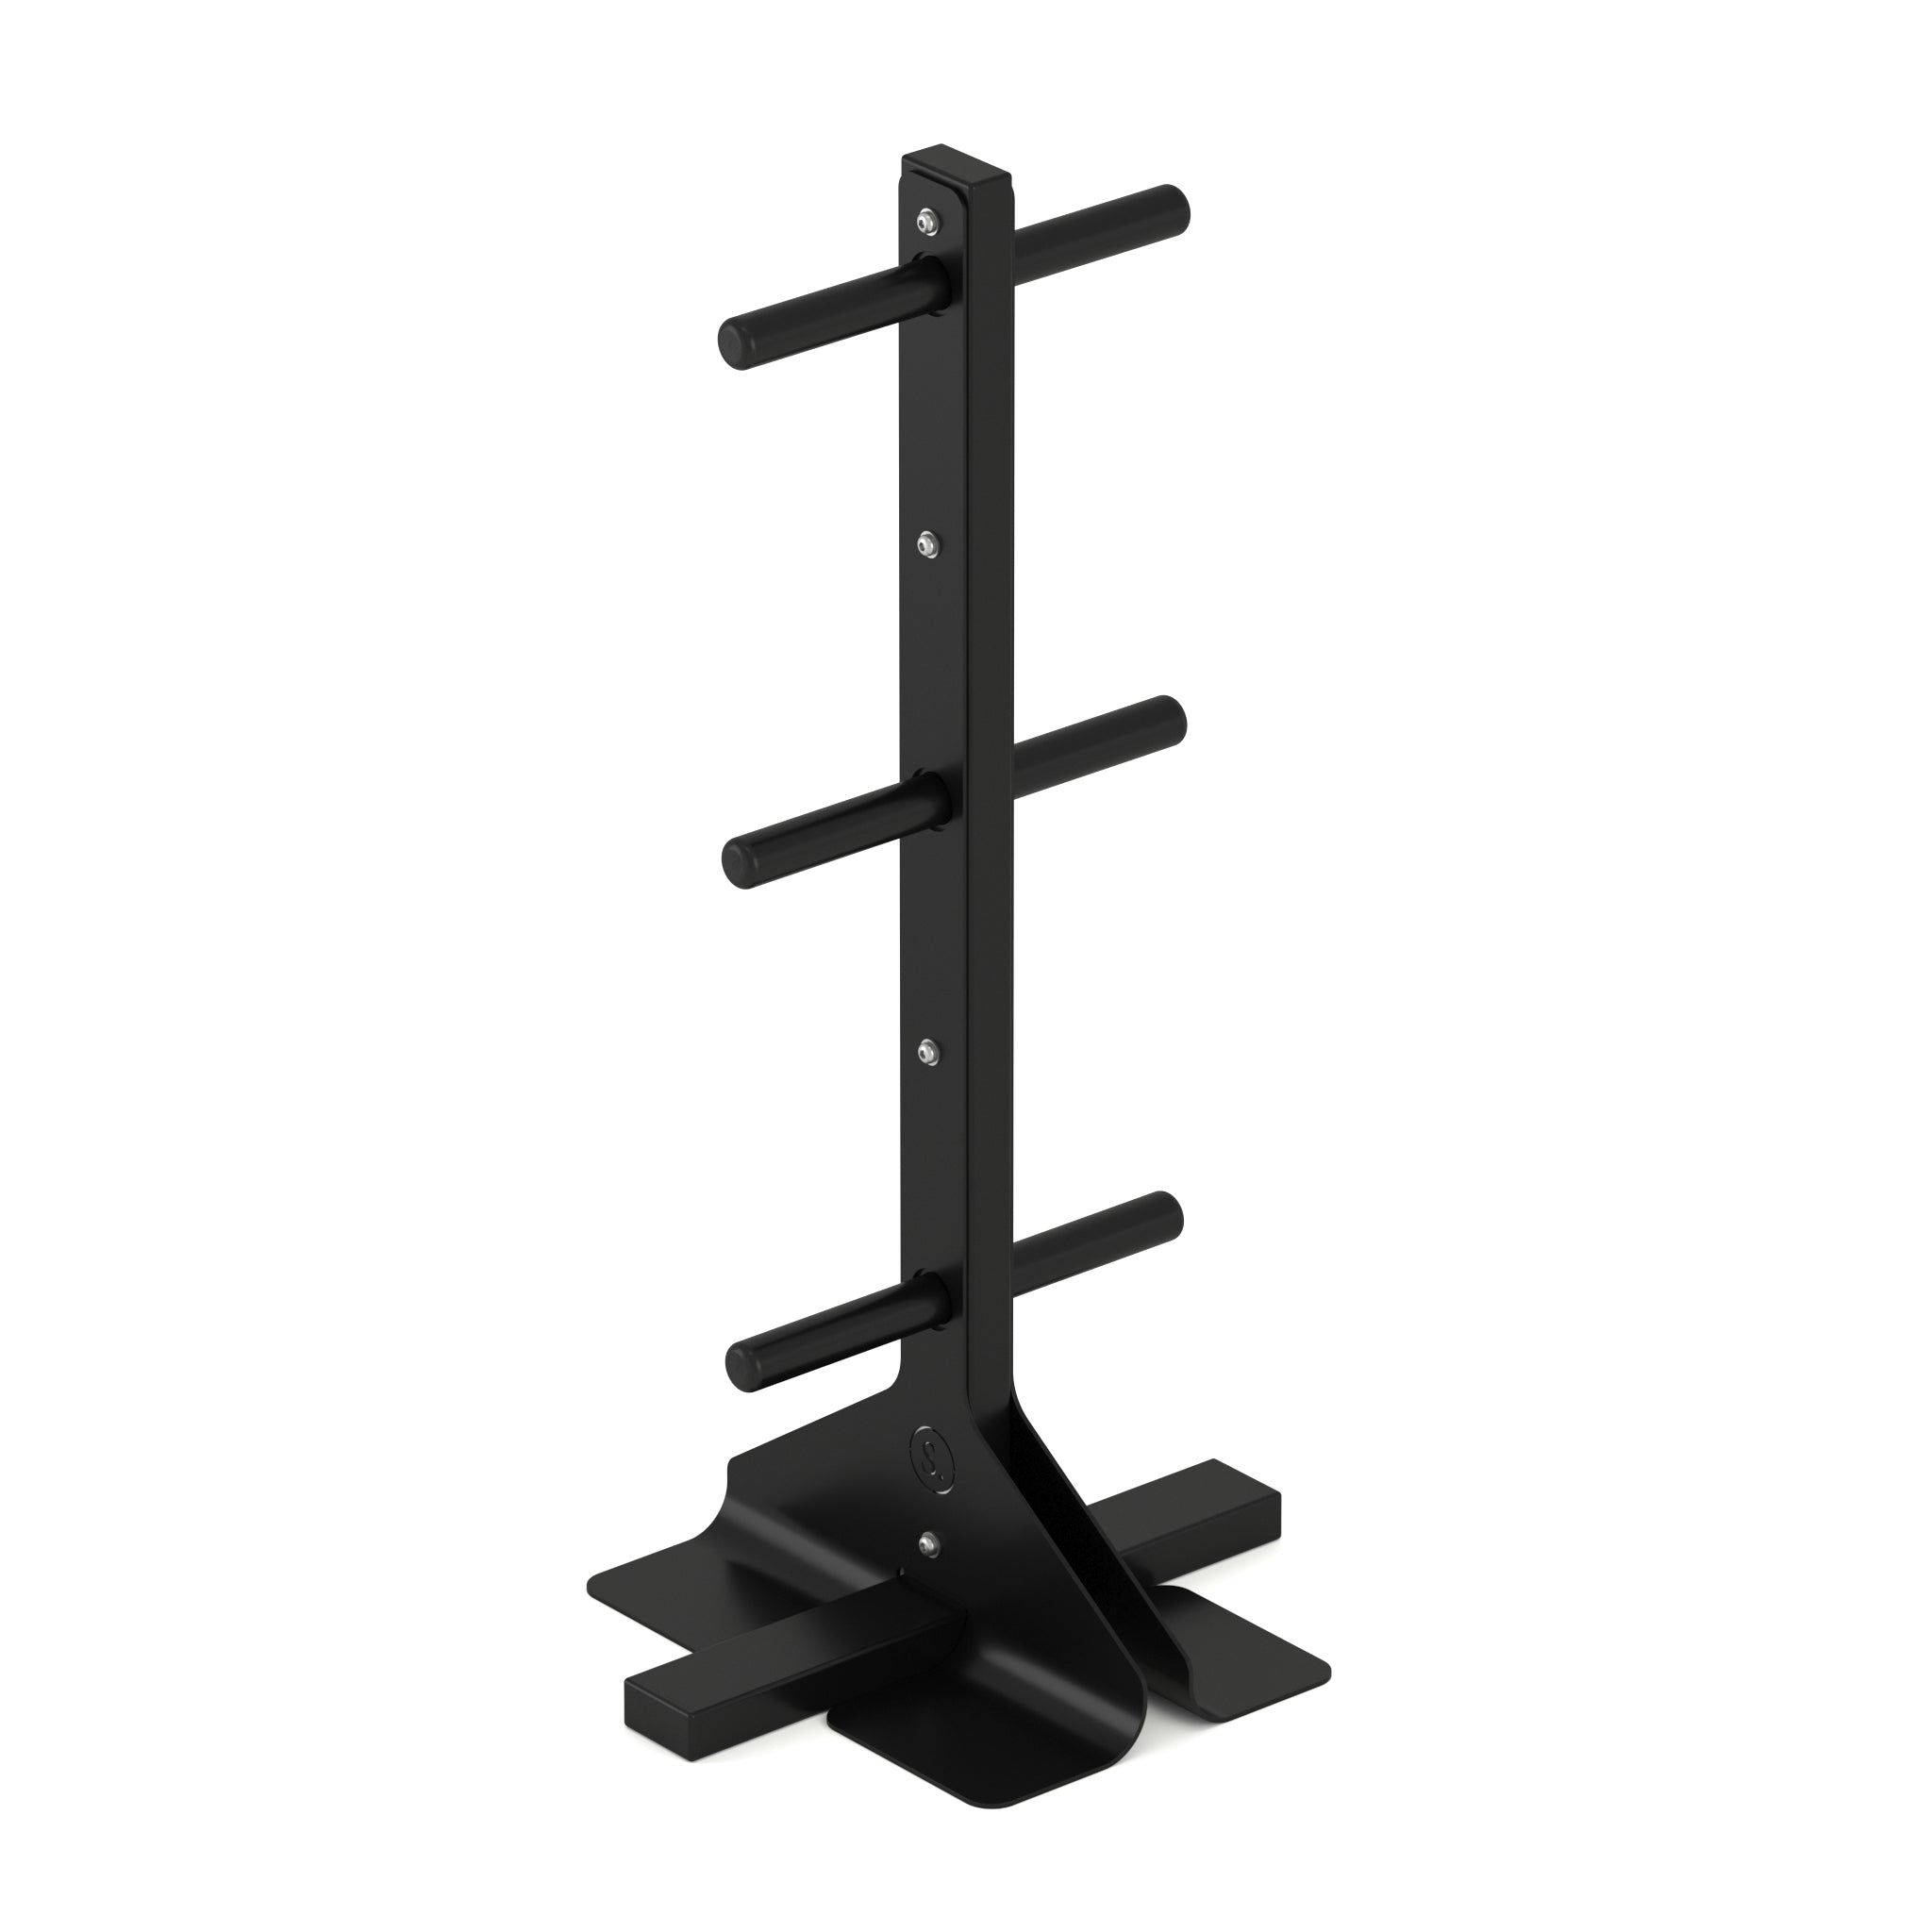 Solo Weight Plate Storage Tree